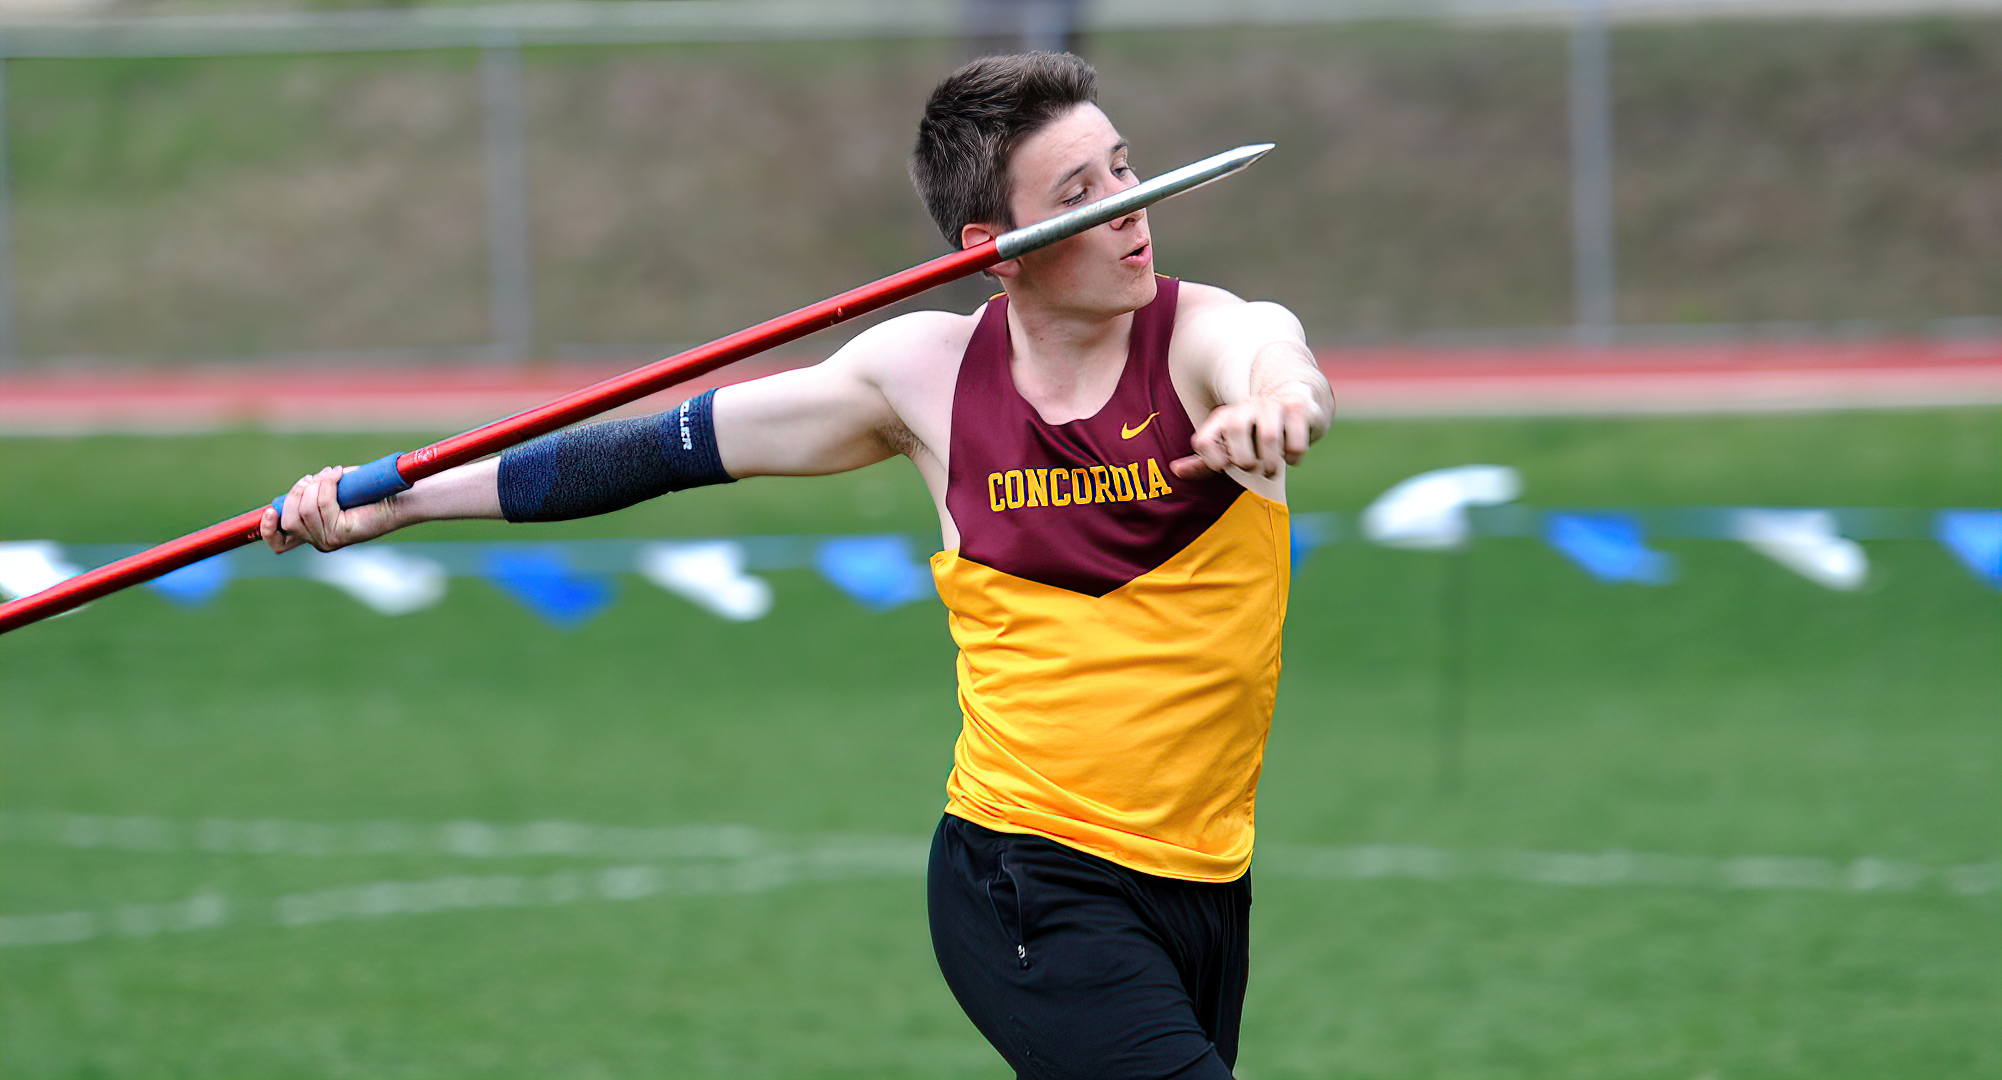 Wade Rhonemus gets ready to unleash the javelin during the second day of the MIAC decathlon. (Photo courtesy of Carleton Sports Info)